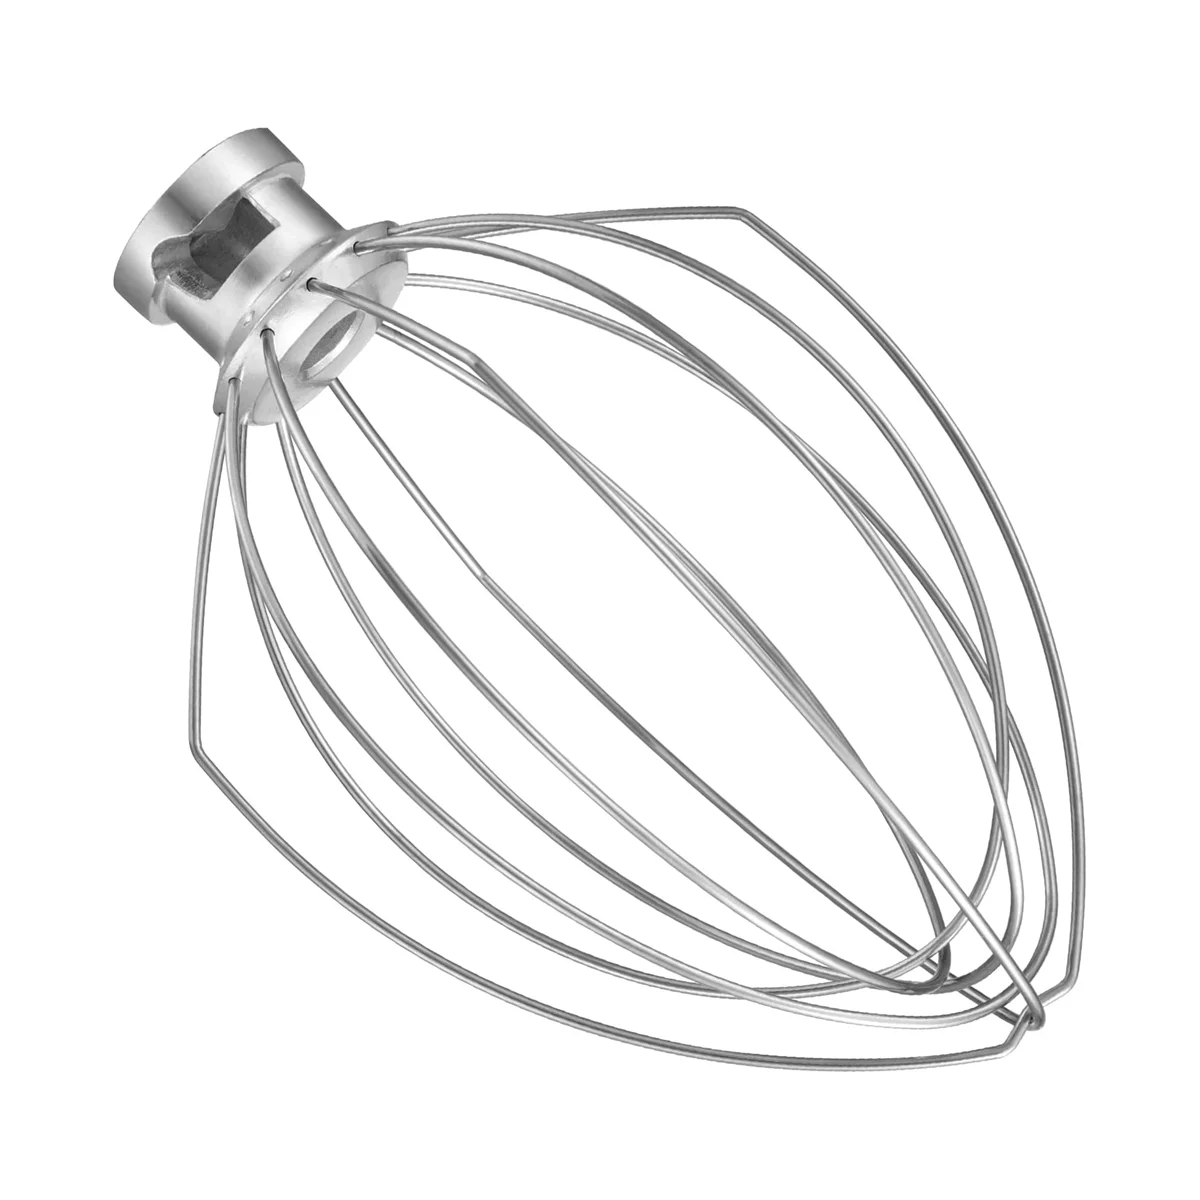 https://ae01.alicdn.com/kf/S10bac319b3404551a6fcfee782a6a418F/Wire-Whip-for-Kitchenaid-Stand-Mixer-5QT-Lift-and-6QT-Whisk-Attachment-Stainless-Steel-Egg-Cream.jpg